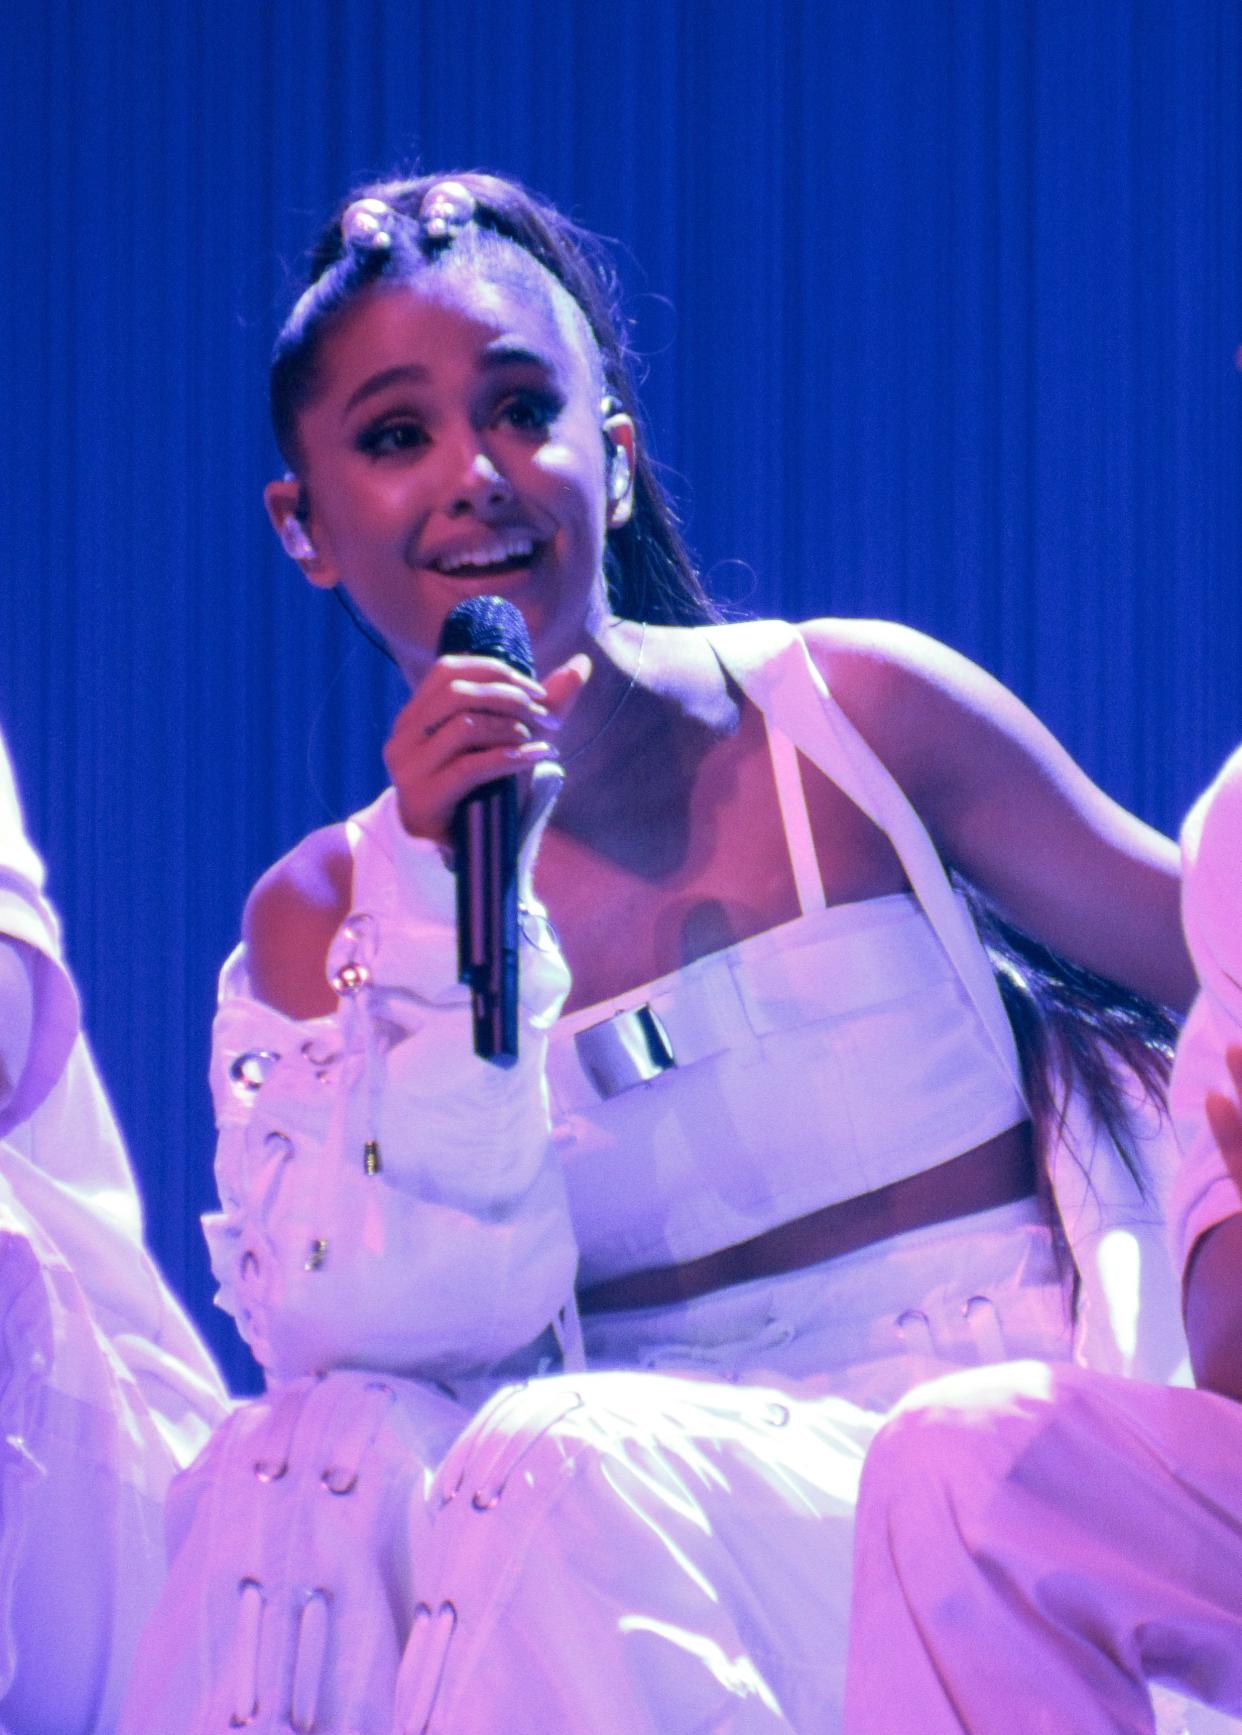 Ariana Grande put on an amazing show in Atlanta featuring a reunion with her cast mates from the Nick show, 'Victorious'.